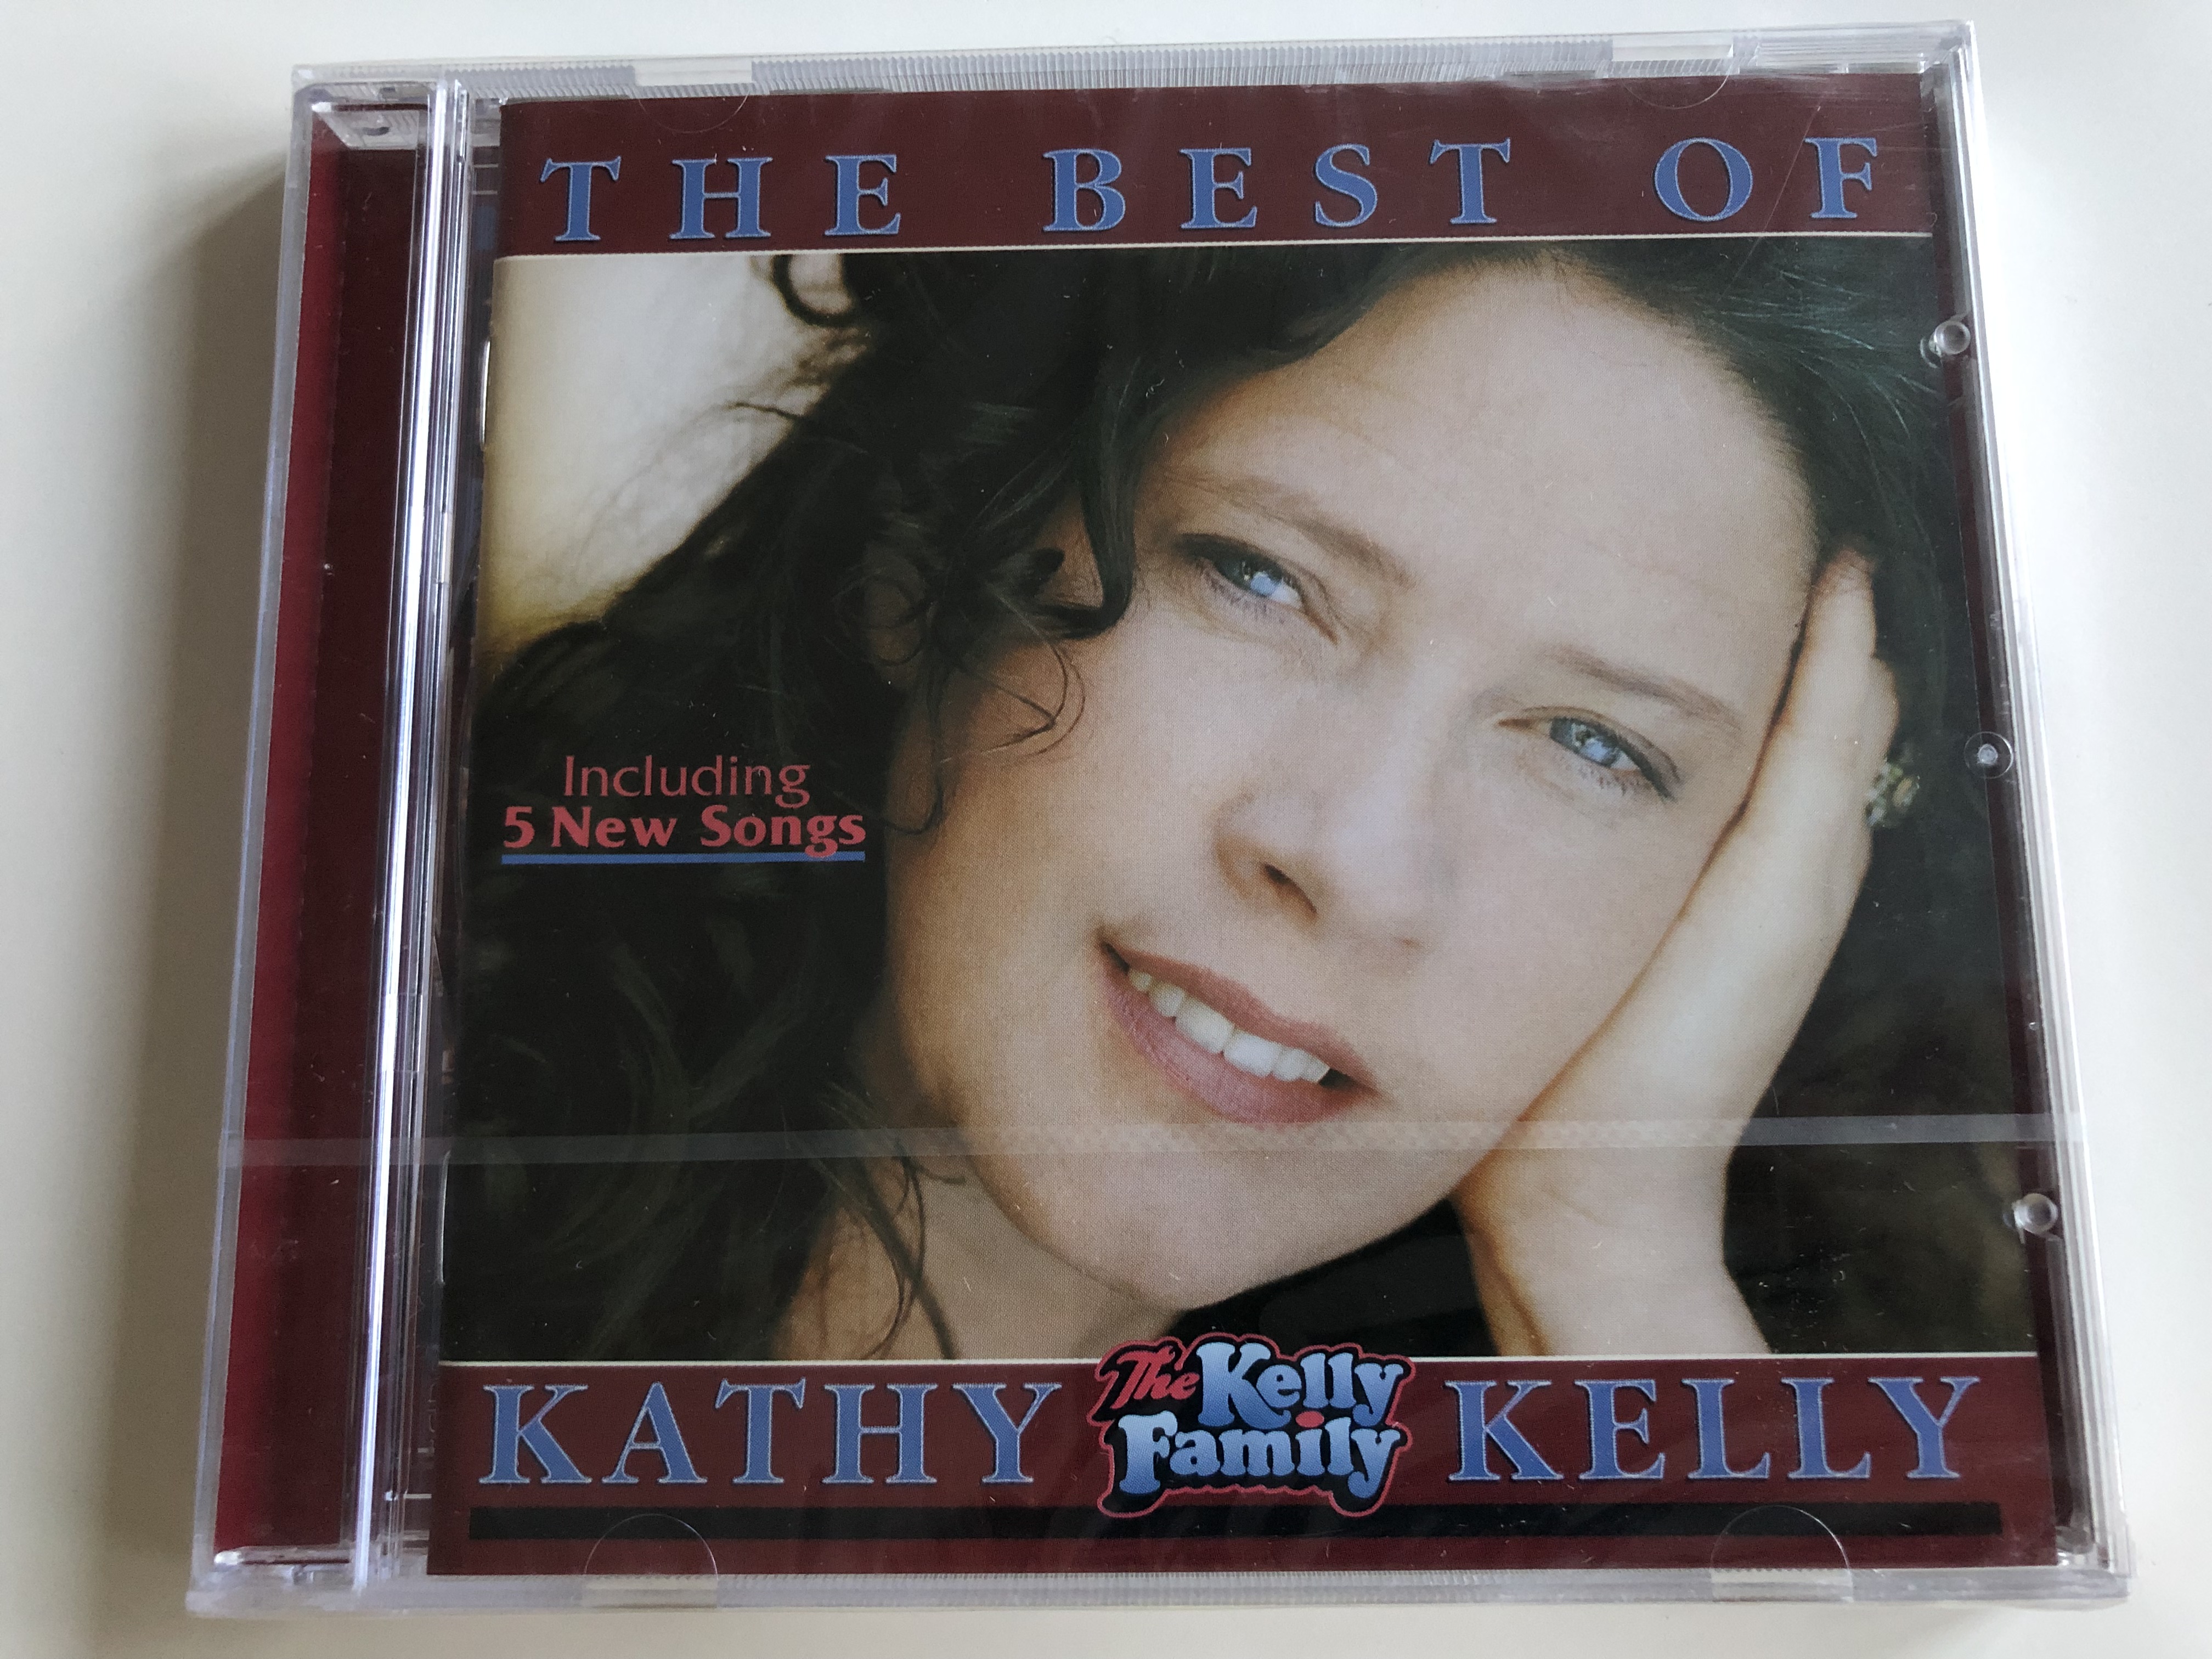 the-best-of-kathy-kelly-the-kelly-family-audio-cd-1999-including-5-new-songs-cd-99-916-1-.jpg